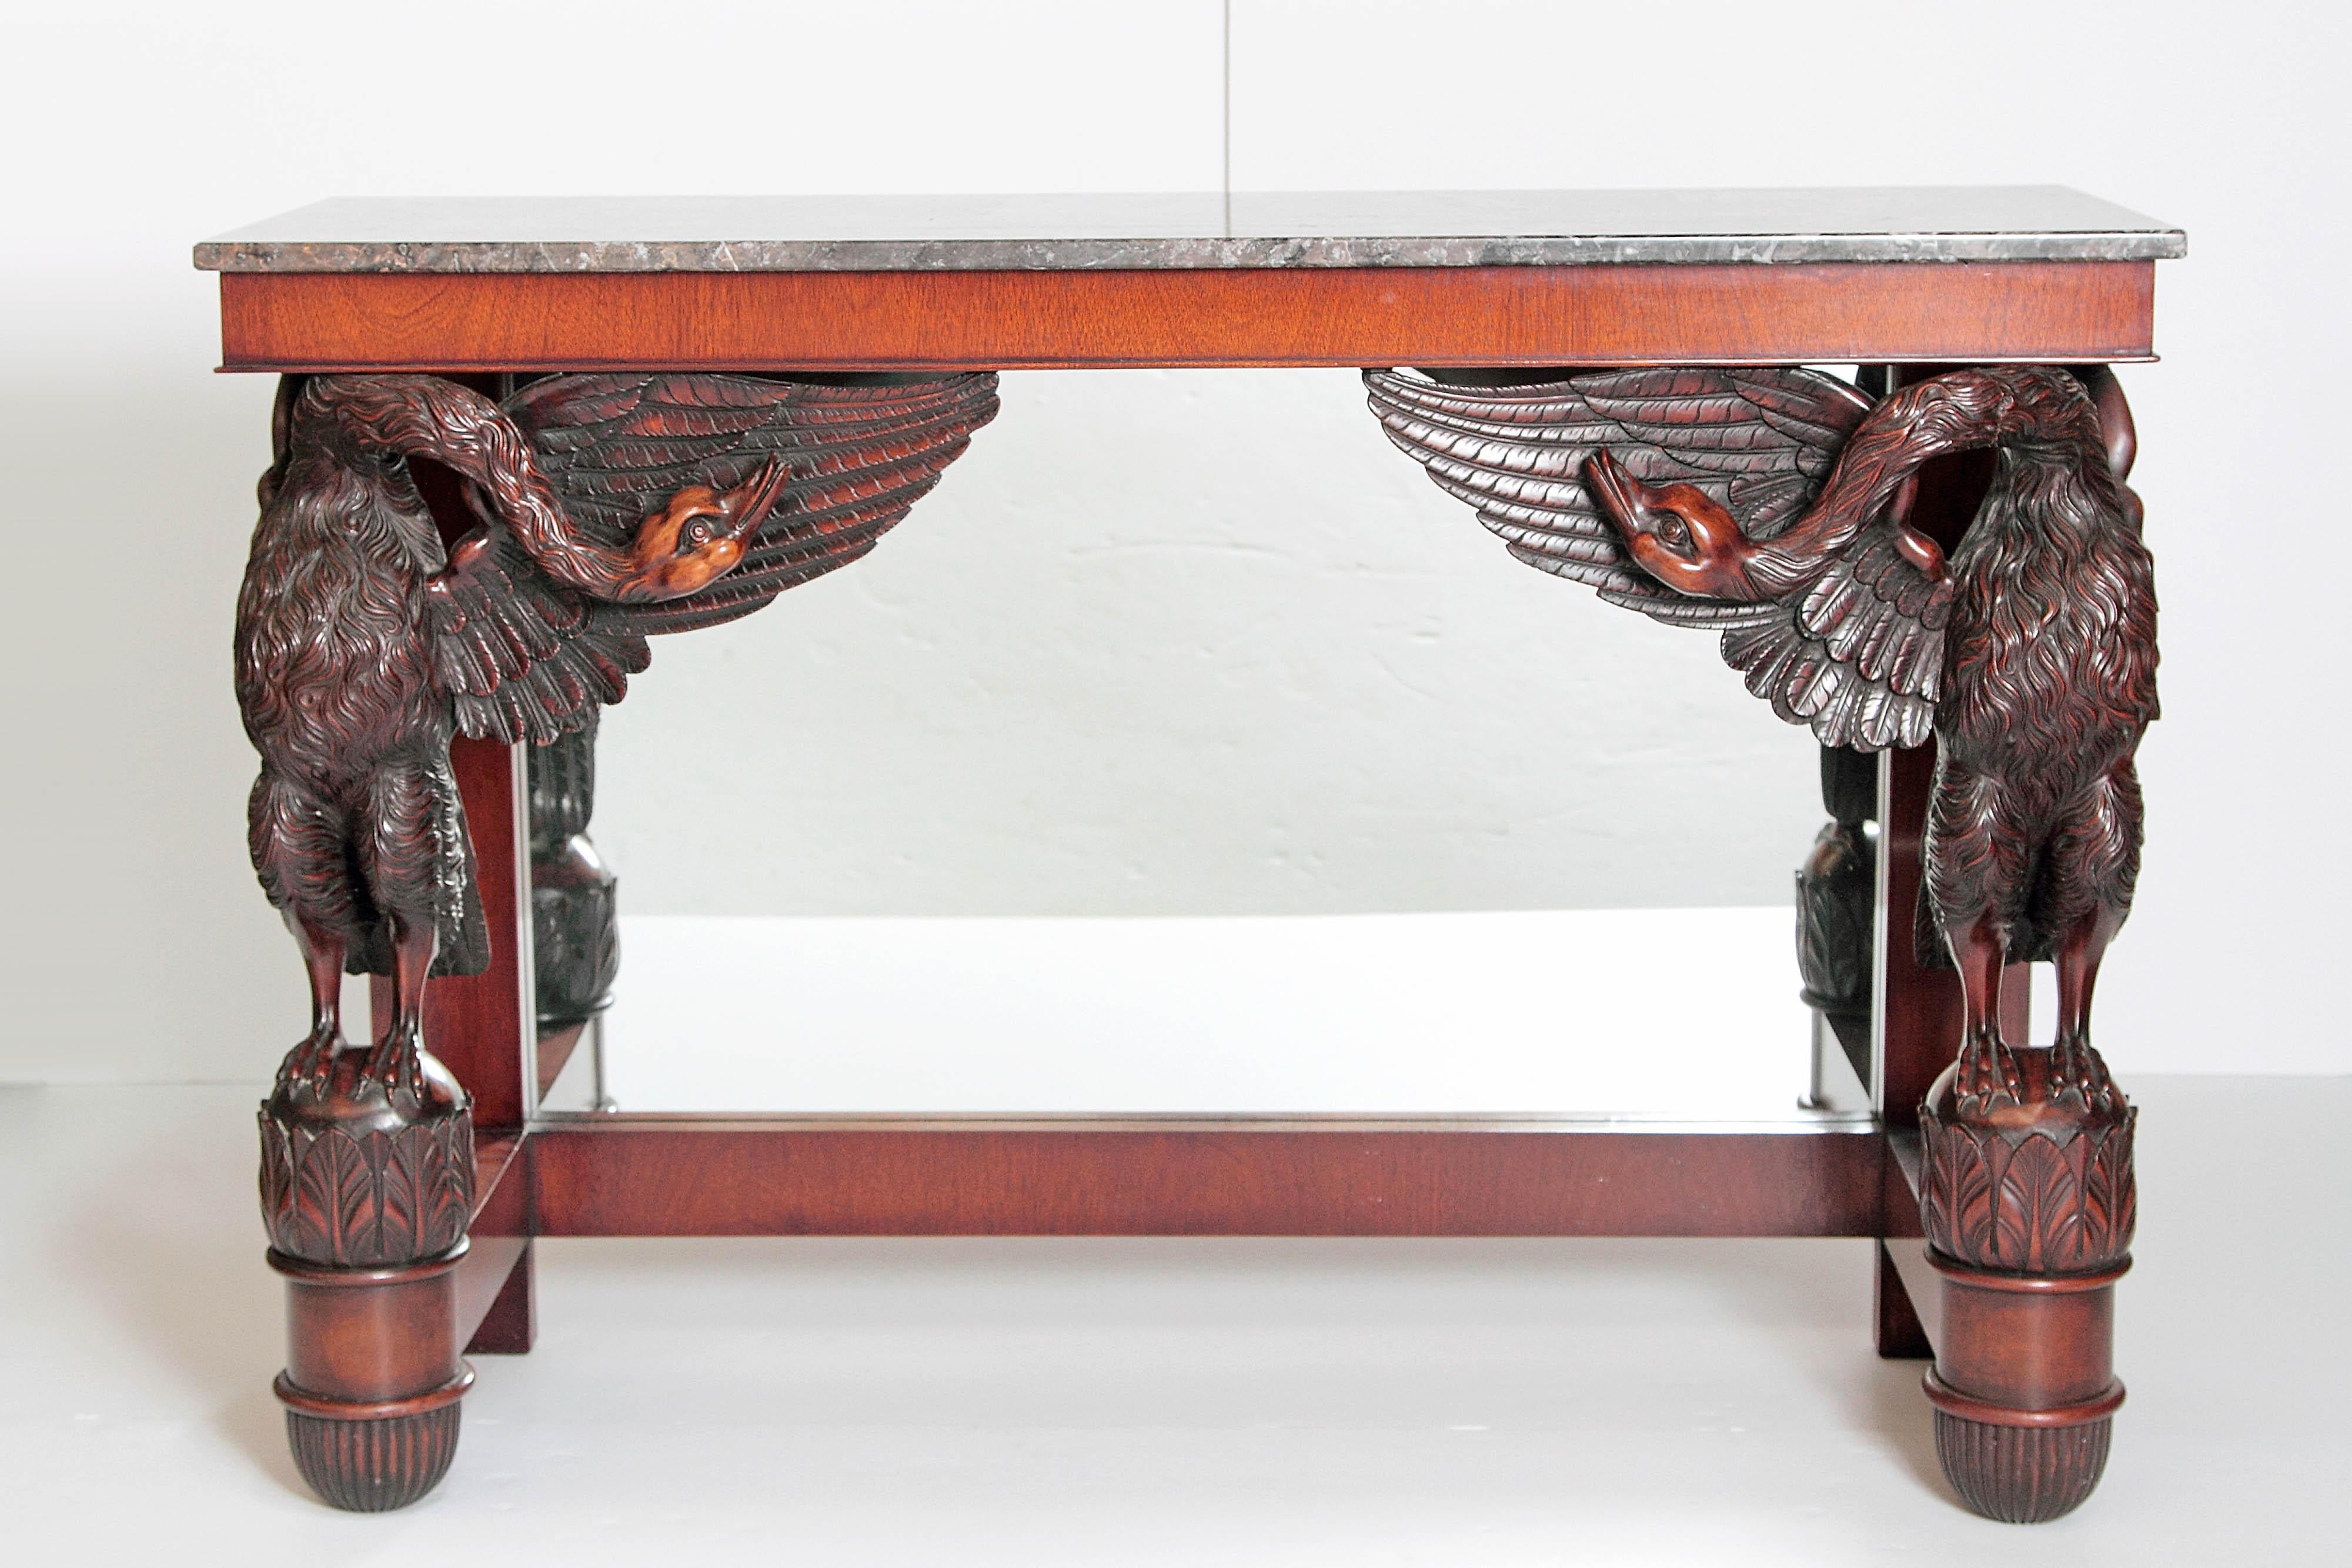 A mahogany pier table with carved swans, mirrored back and grey marble top (not original to the piece) early 19th century France (marble top replaced).